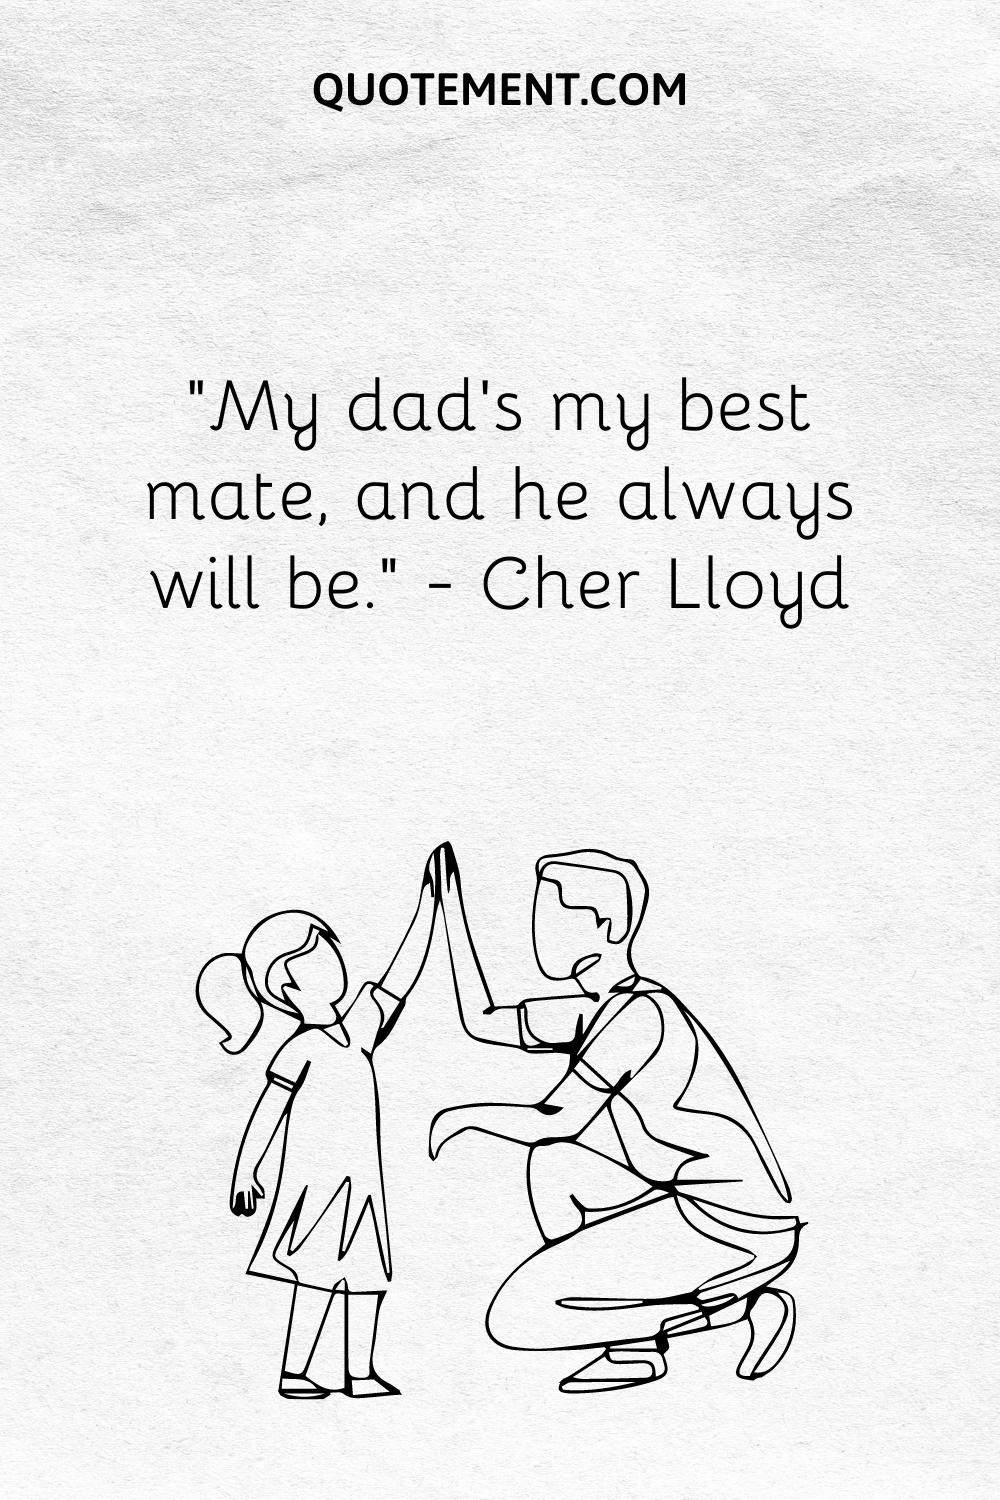  “My dad’s my best mate, and he always will be.” — Cher Lloyd